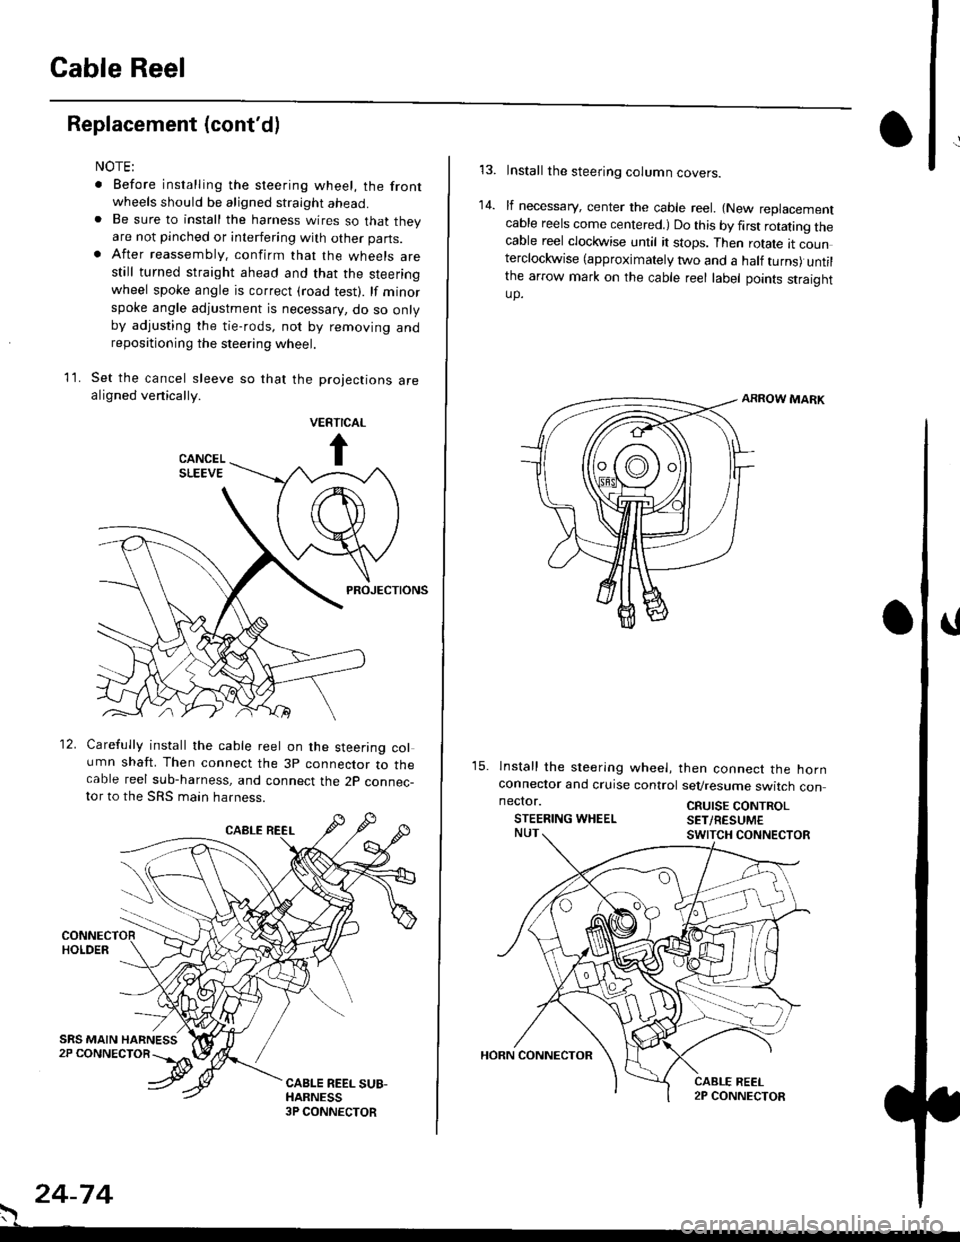 HONDA CIVIC 1996 6.G Owners Guide Cable Reel
Replacement (contd)
11.
NOTE:
. Before installing the steering wheel, the front
wheels should be aligned straight ahead.. Be sure to install the harness wires so that theyare not pinched o